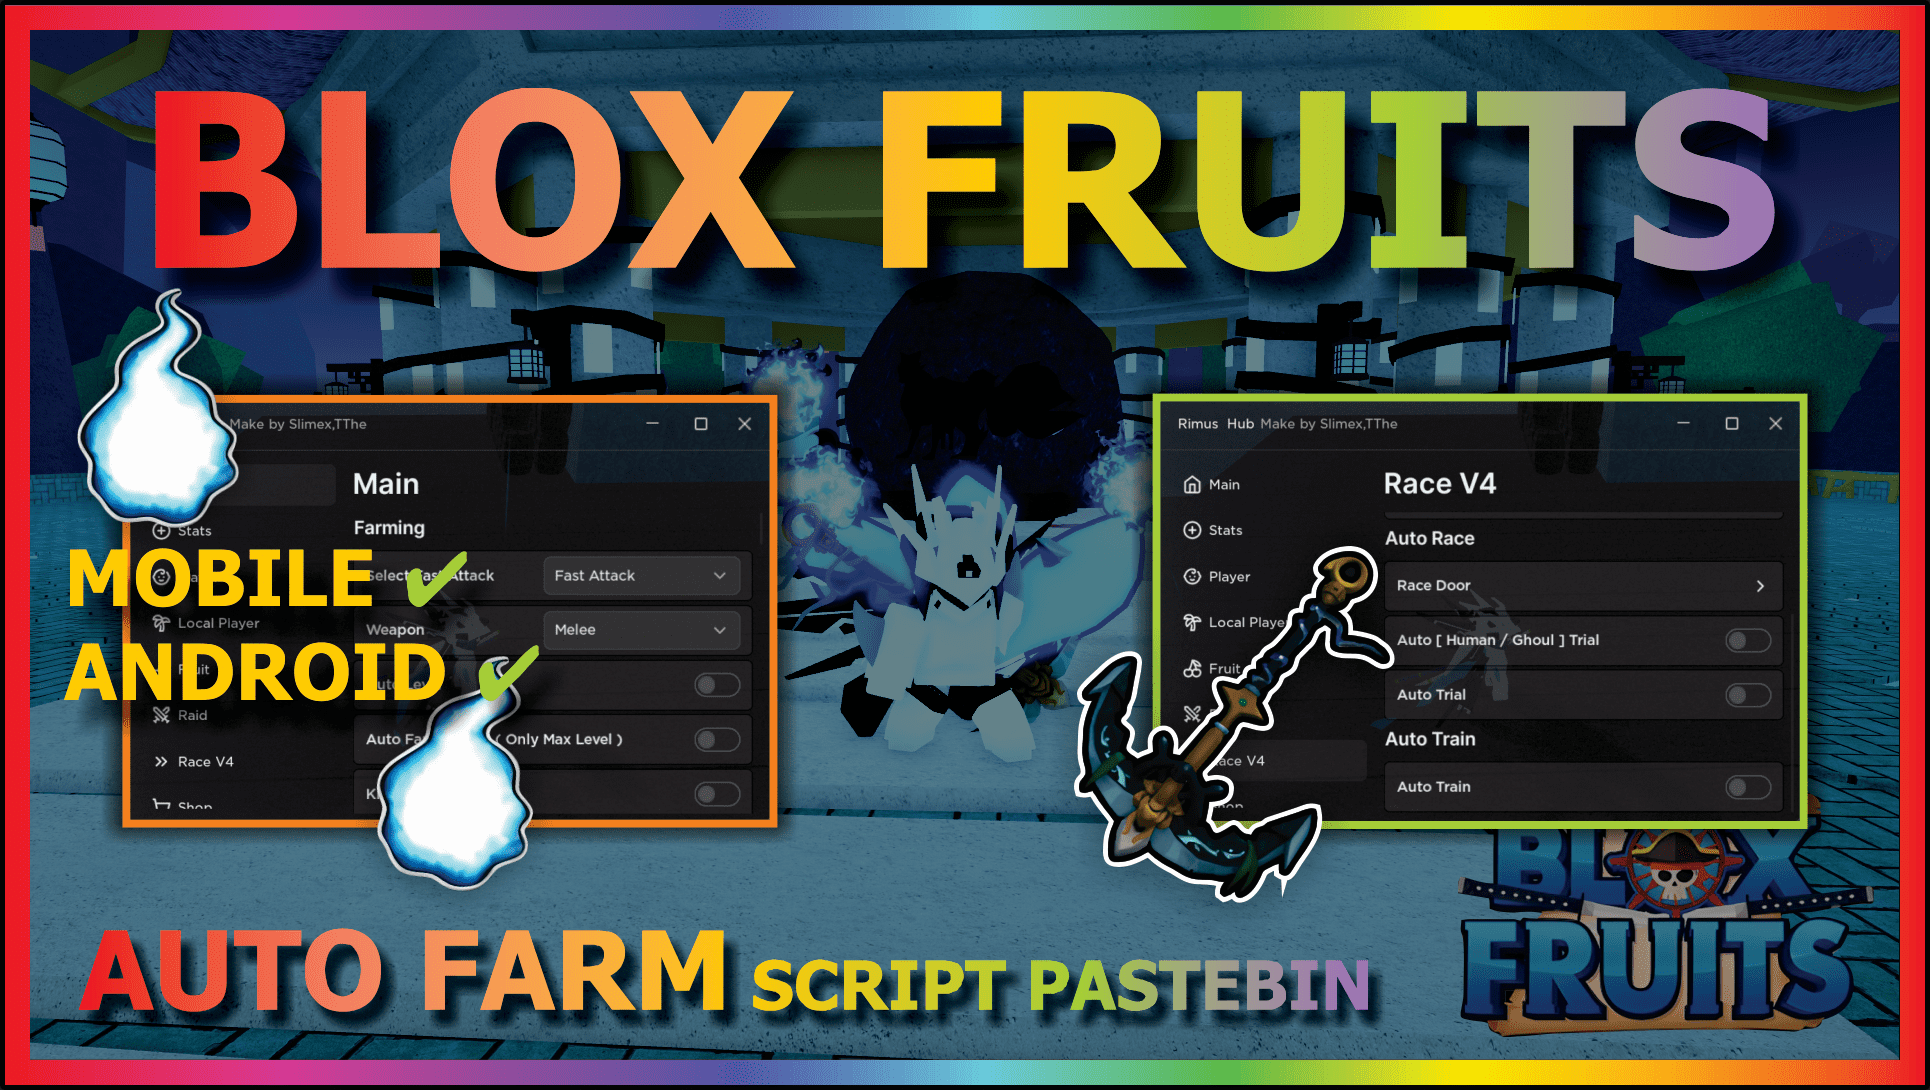 You are currently viewing BLOX FRUITS (RIMUS)